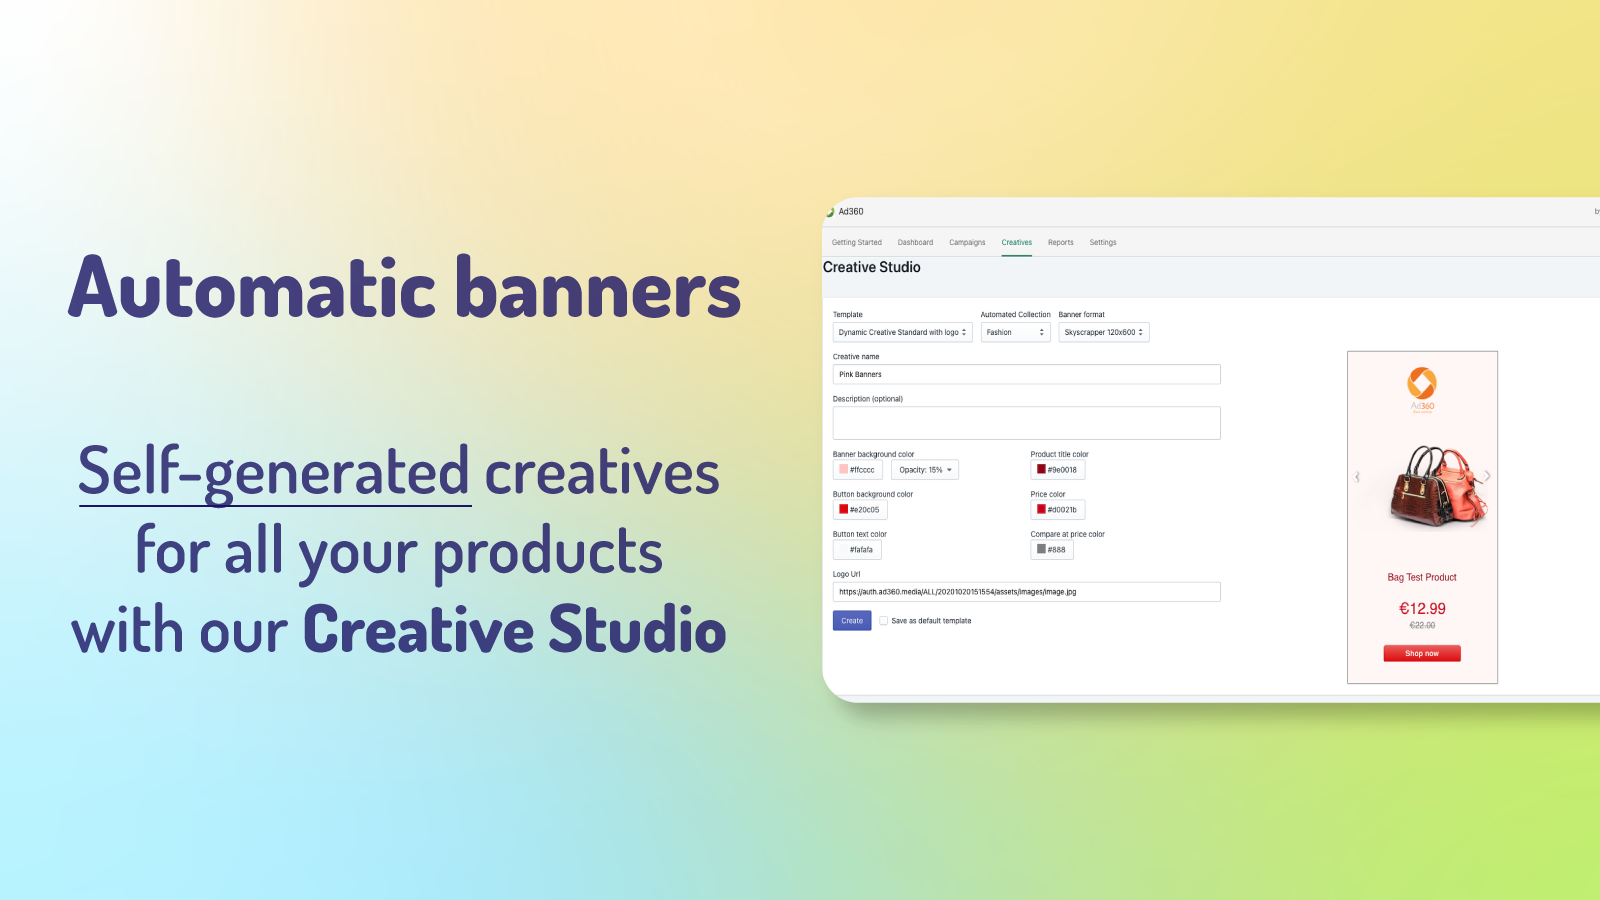 Automatic Banners: Self-generated creatives for all products